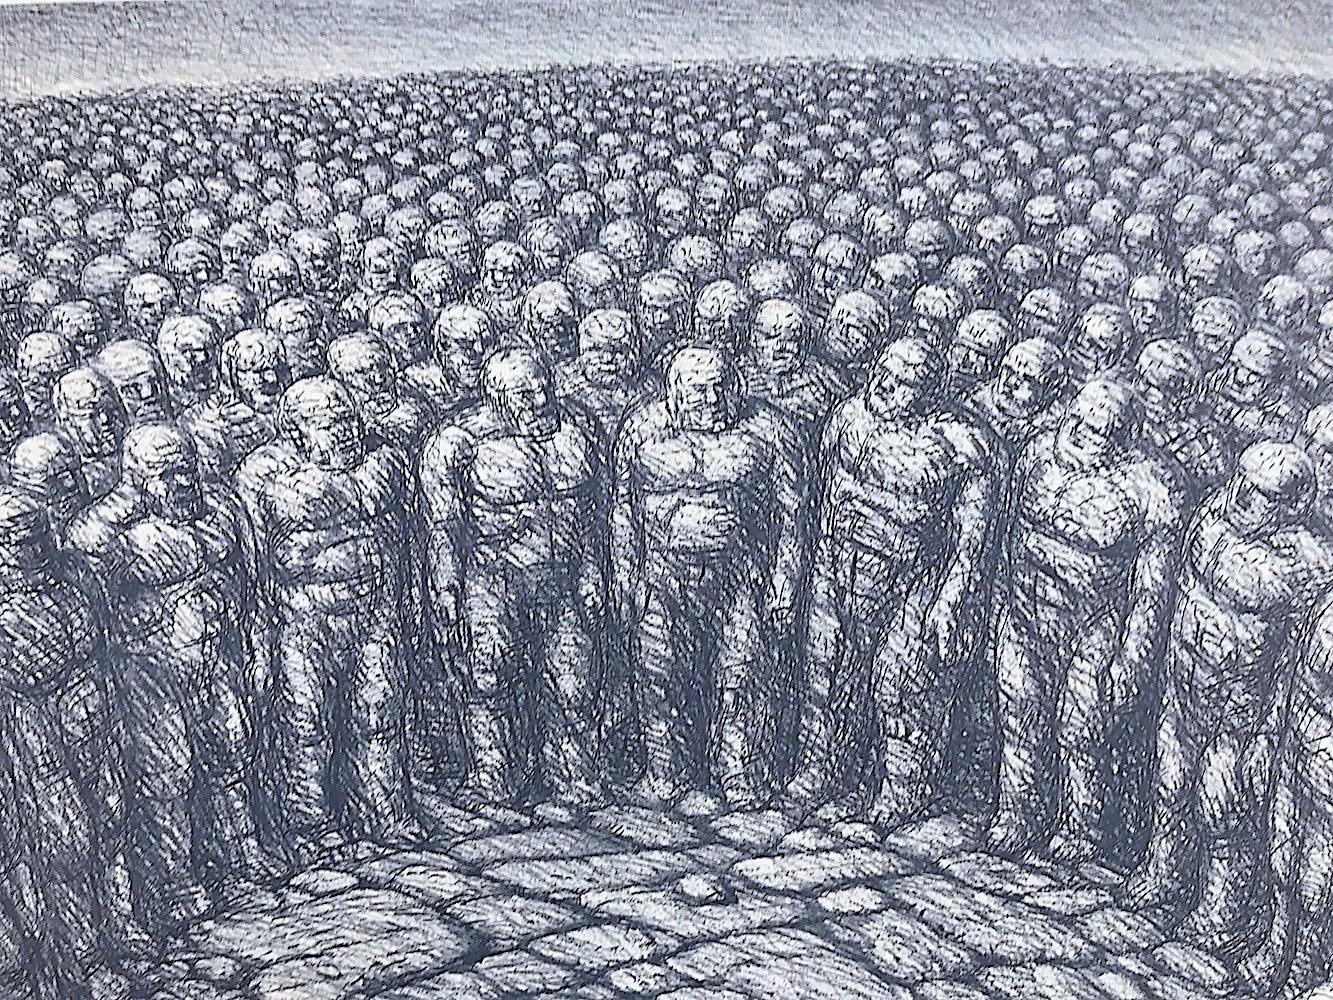 CENTER OF ATTENTION Signed Lithograph, Surreal Figurative Drawing, Crowd Circle - Print by De Es Schwertberger